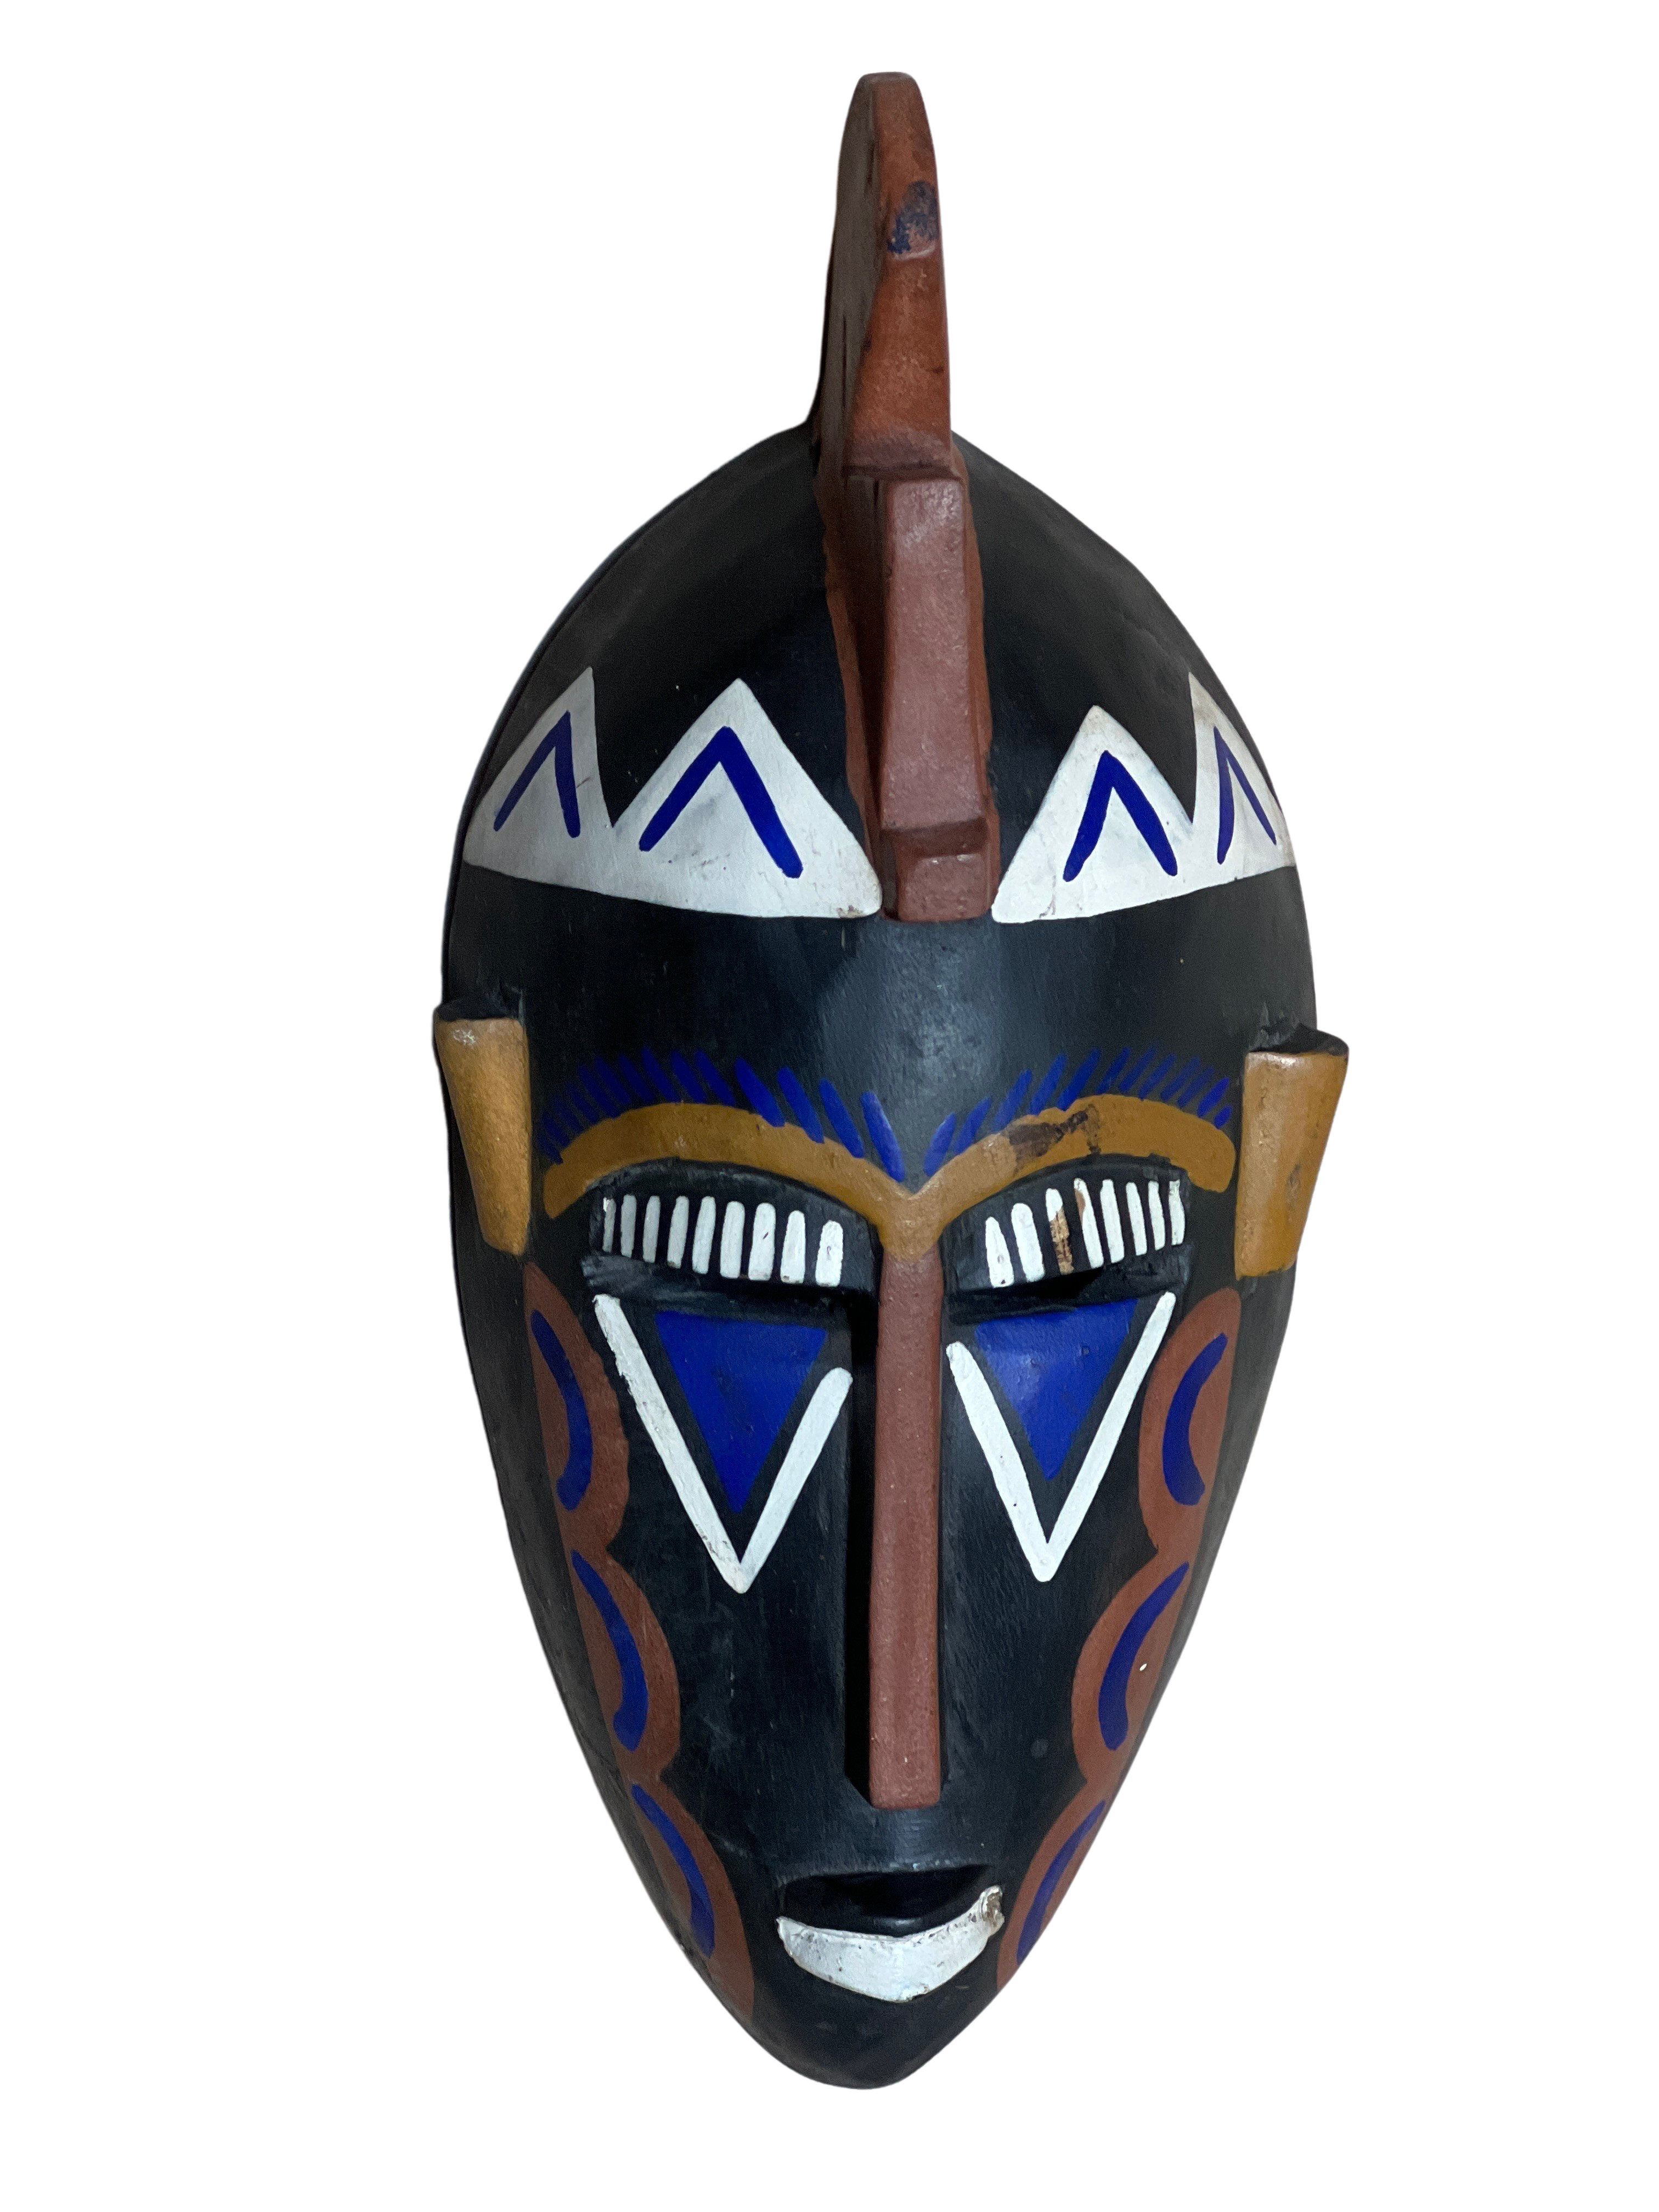 One of a kind African Fine Art: Authentic 'Dogon Mask' from Mali Made in  1948 – Yorks's Shona Gallery: One of a Kind African Art